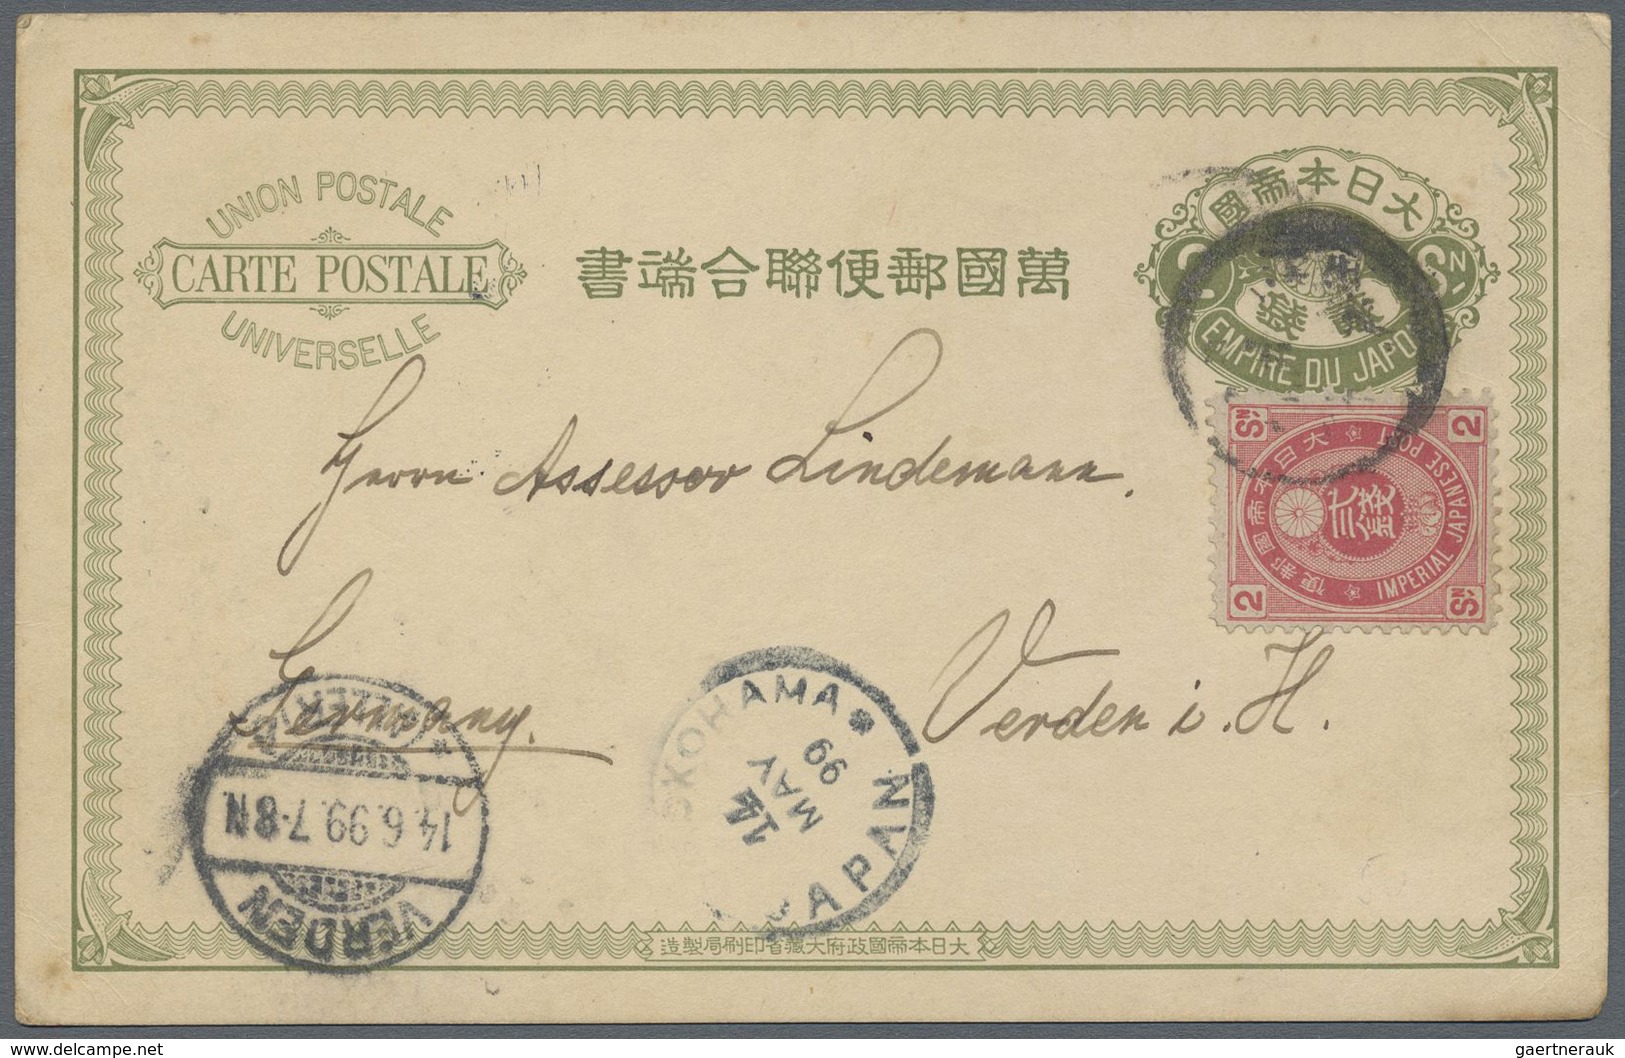 GA/Br Japan: 1883/2007 (ca.), used stationery (51) or ppc (40), often to Thailand and undeliverable with r